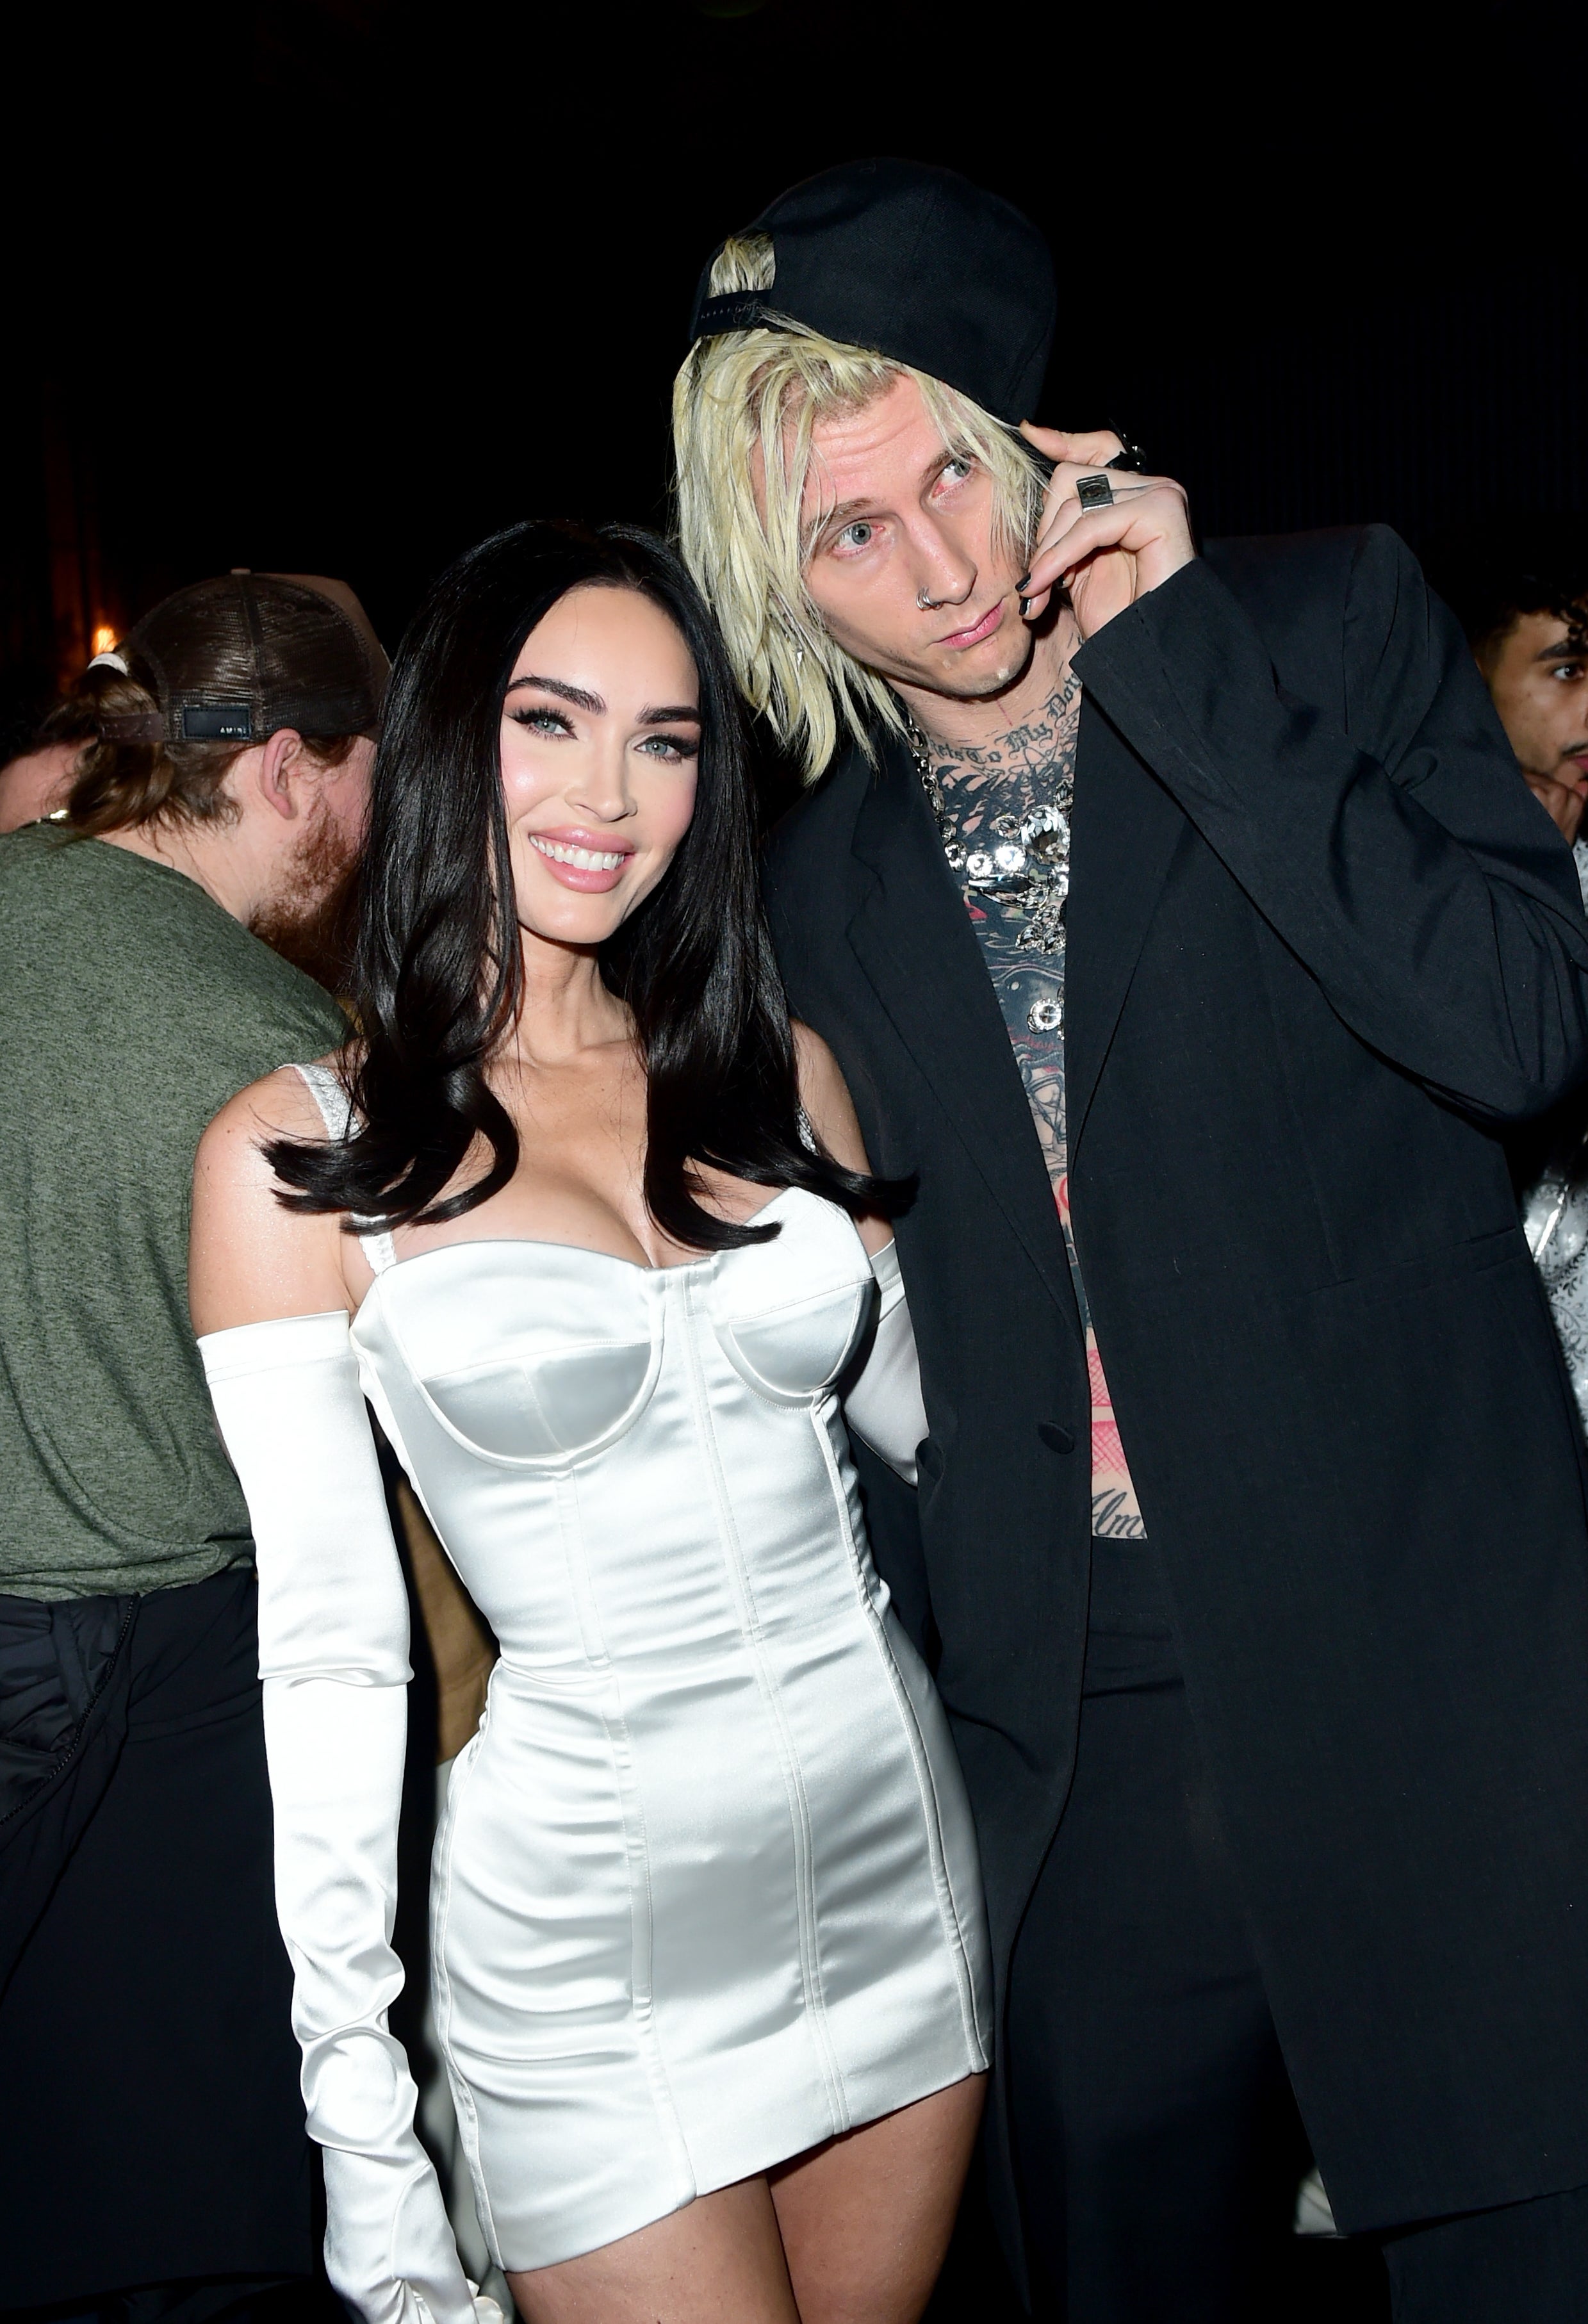 Megan Fox in a corset dress with gloves, and Machine Gun Kelly in a suit with silver chain necklaces at an event